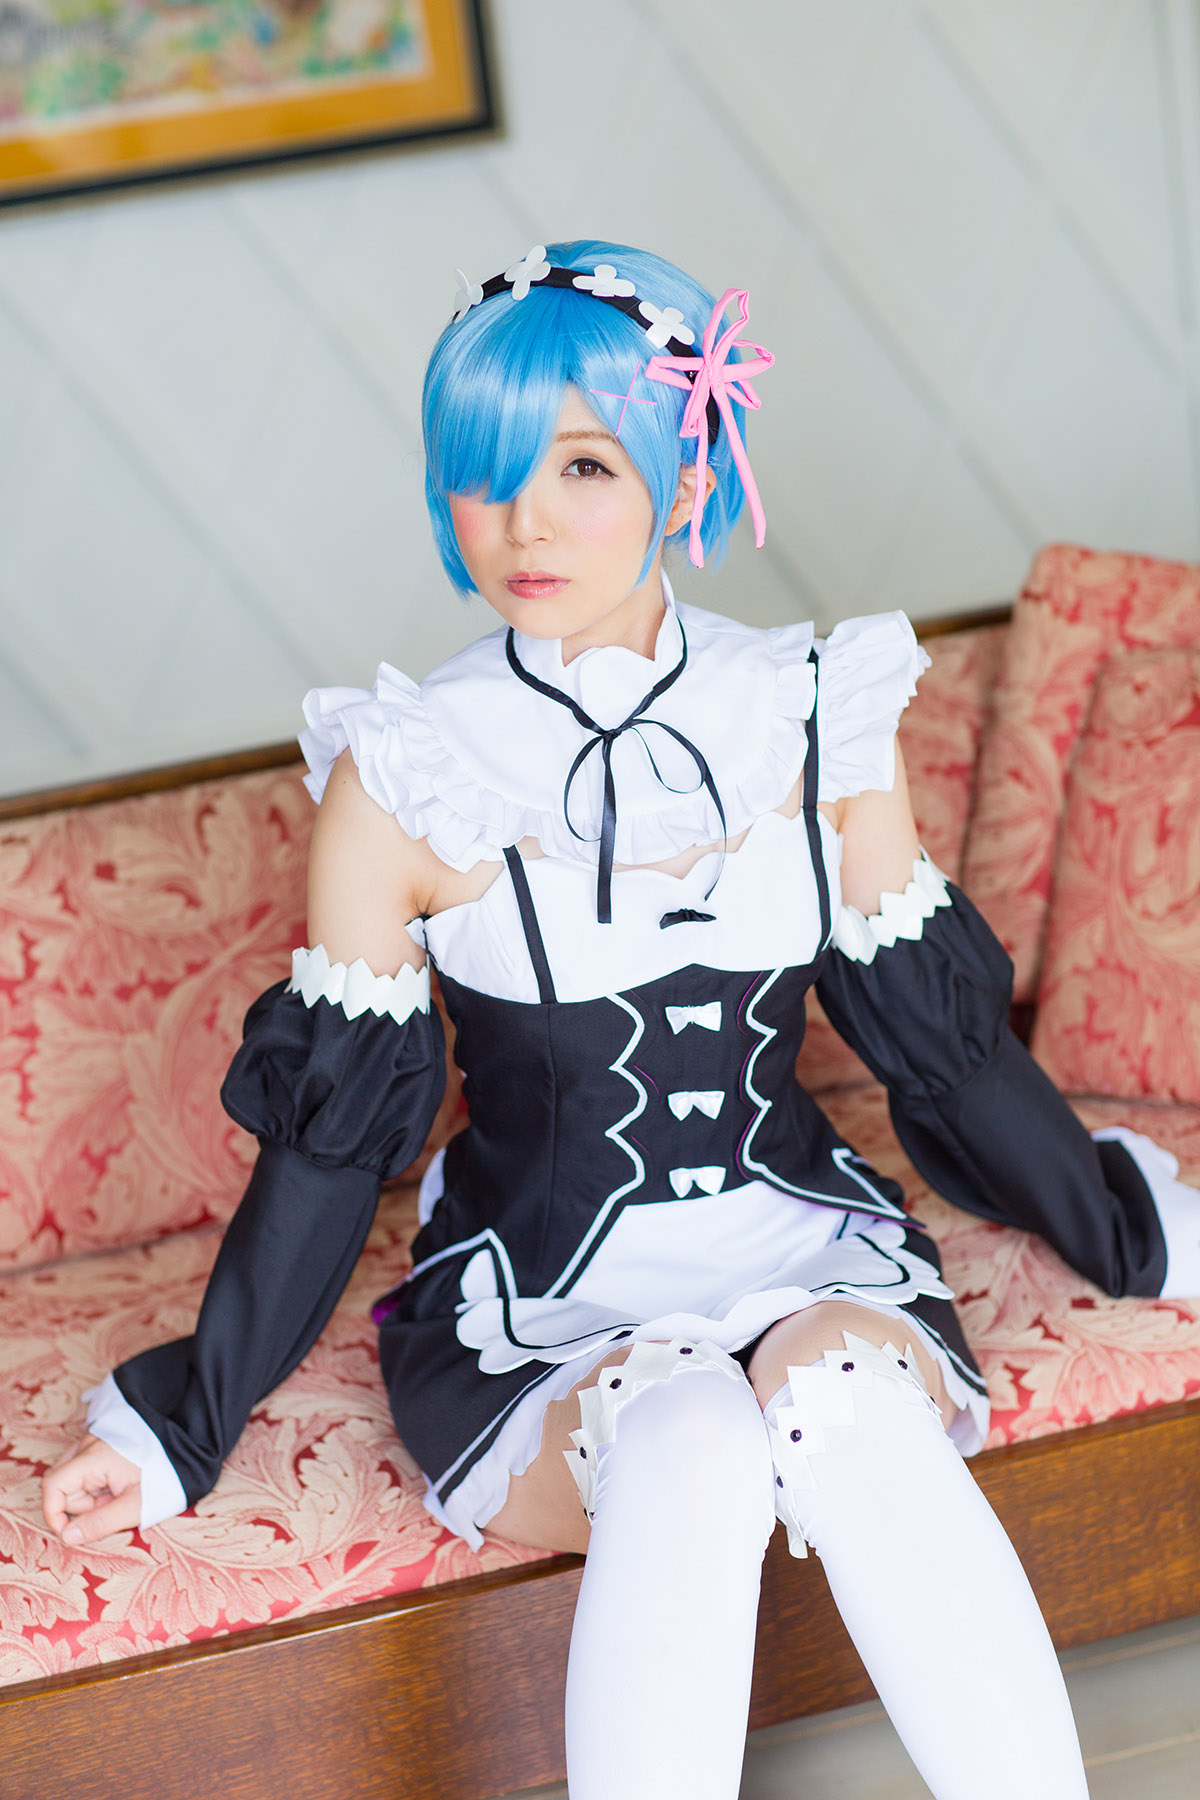 Charming Blue haired girl REM ero Cosplay maid in heaven(8)